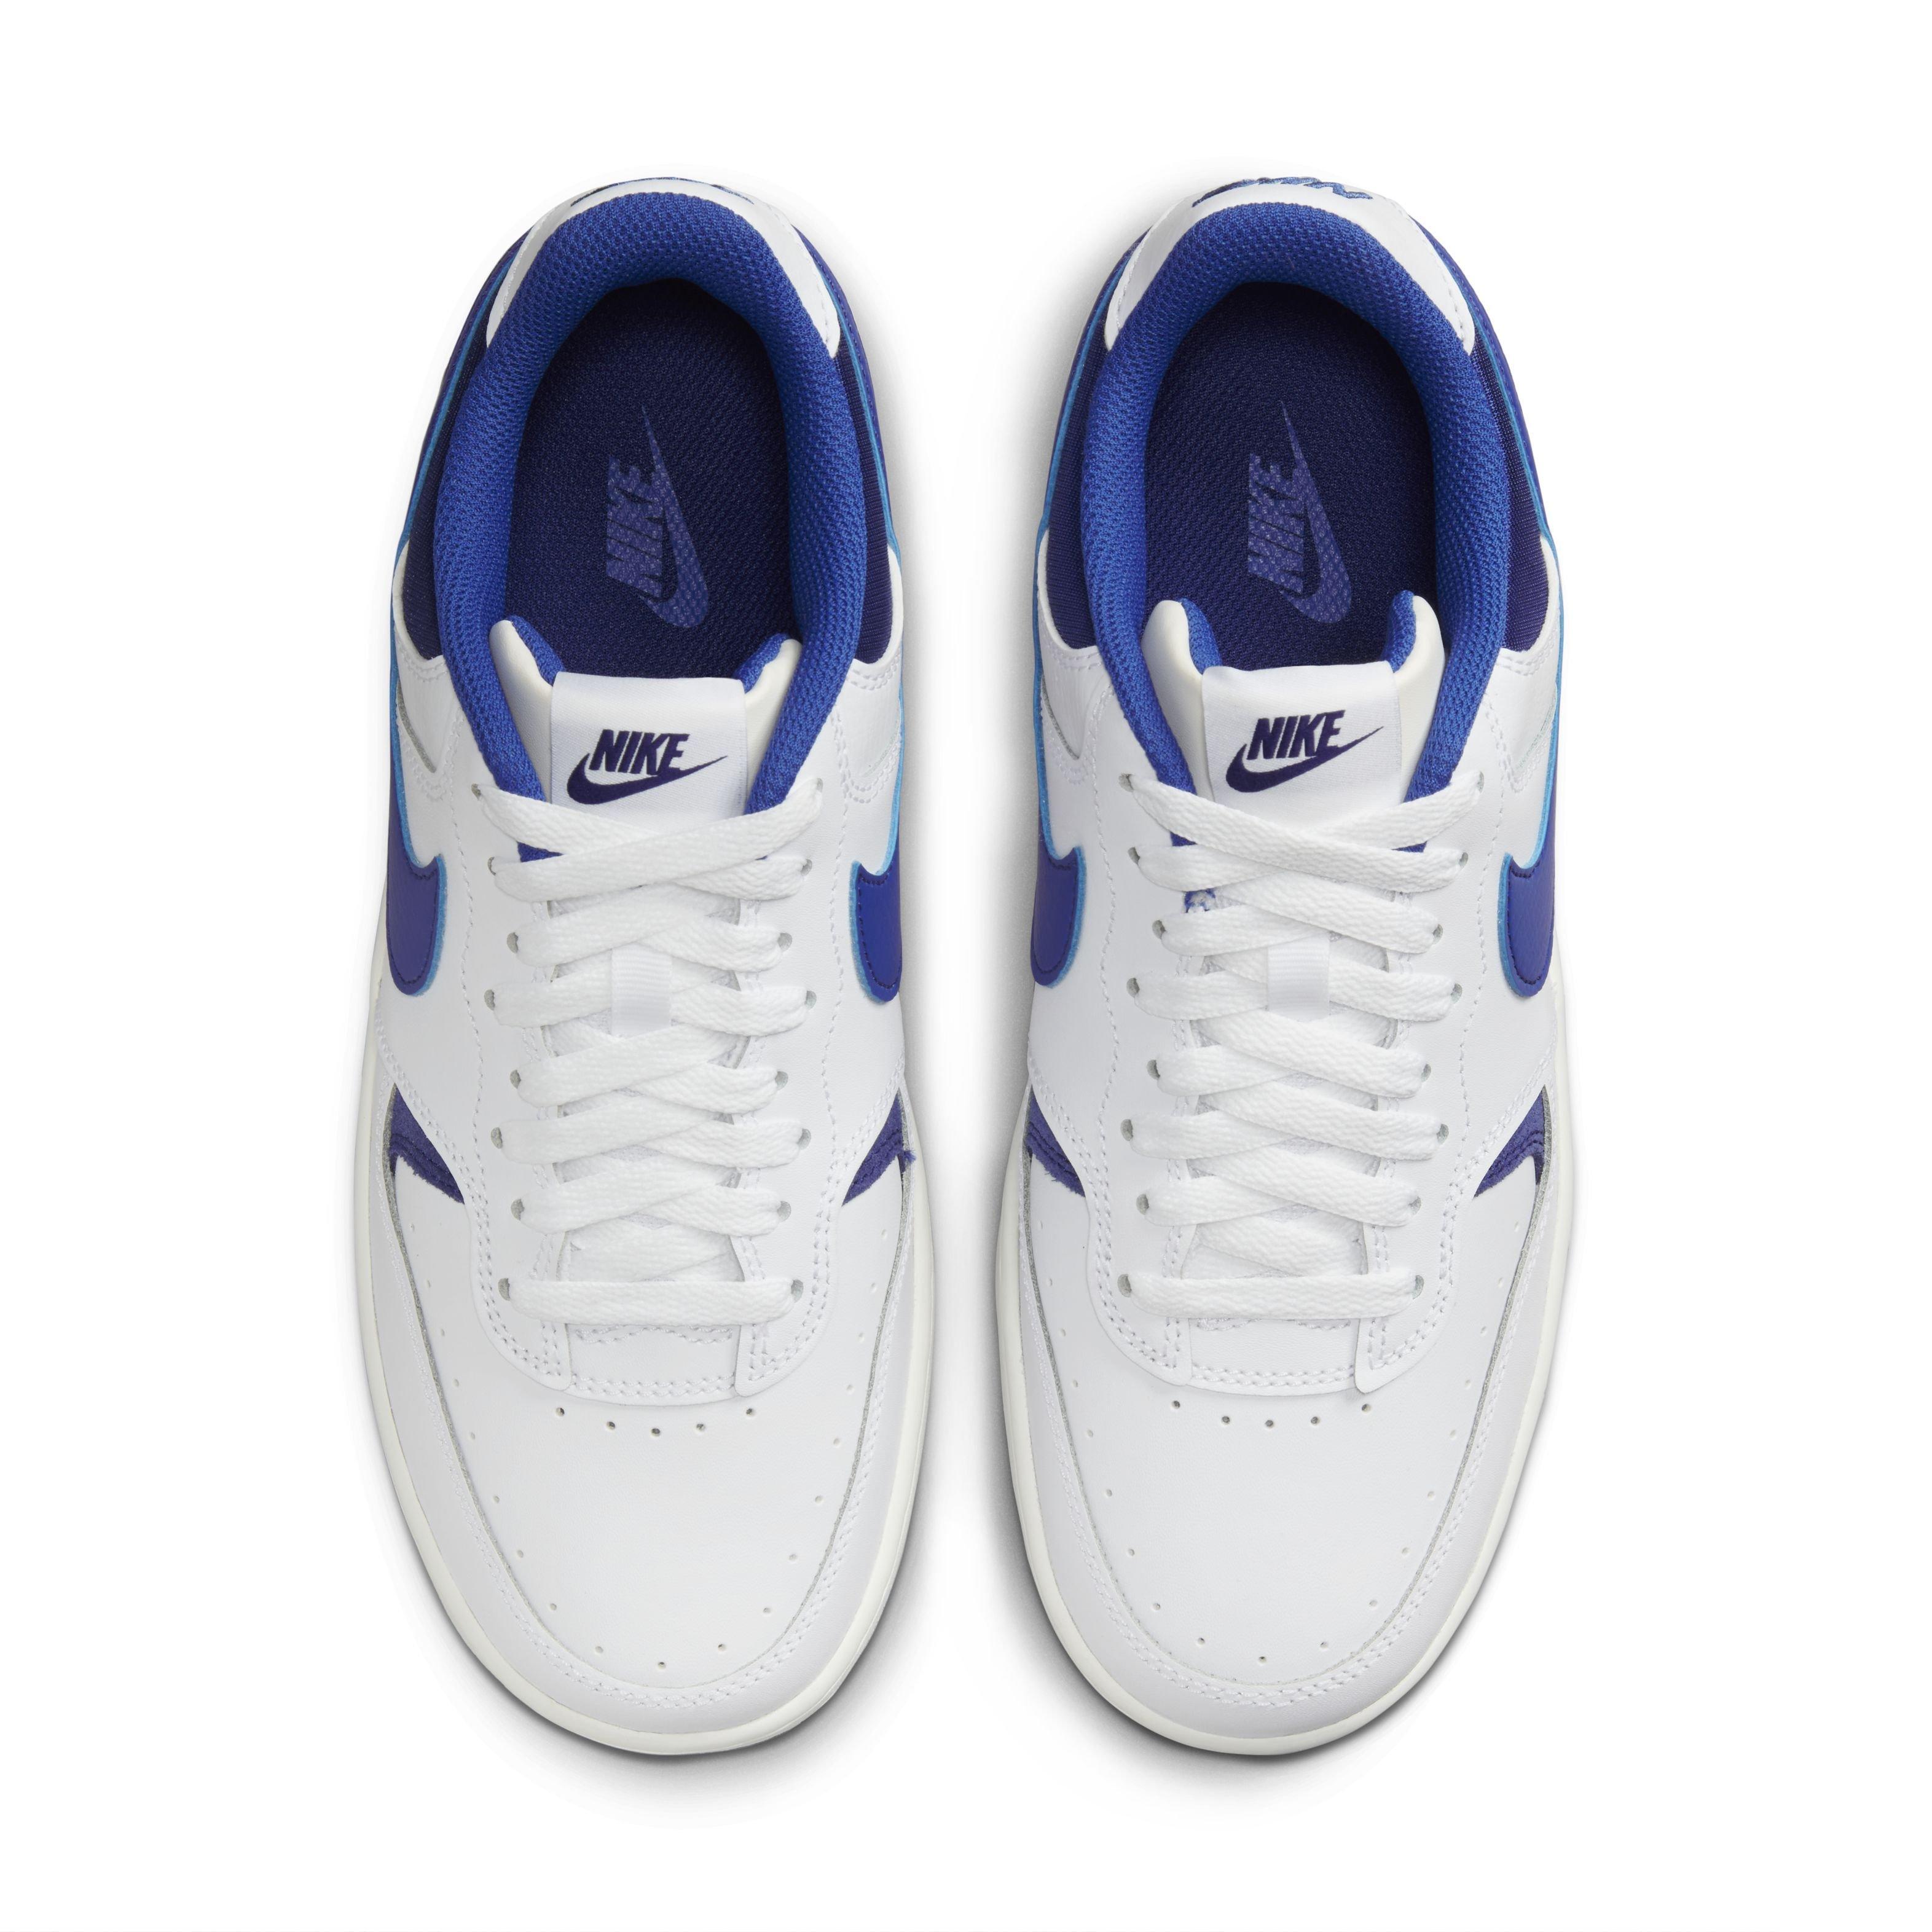 Nike Gamma Force trainers in white and game royal blue